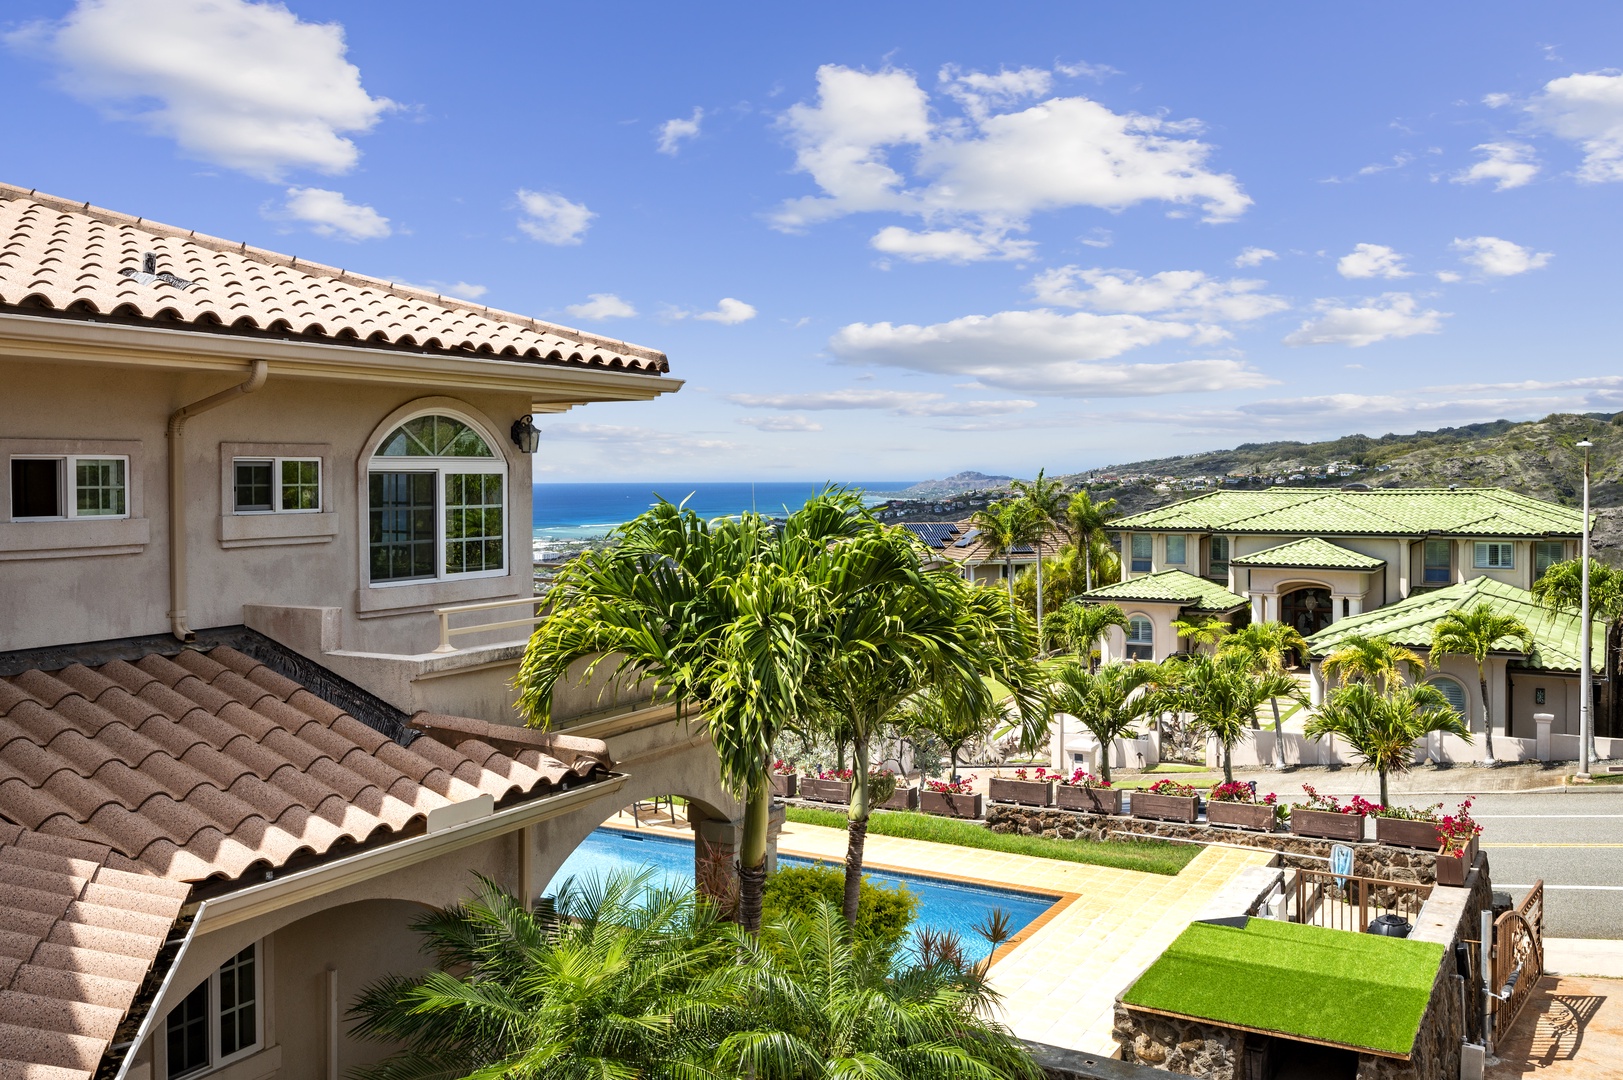 Honolulu Vacation Rentals, Lotus on a Hill* - Experience luxury with amazing views here at Lotus on a Hill